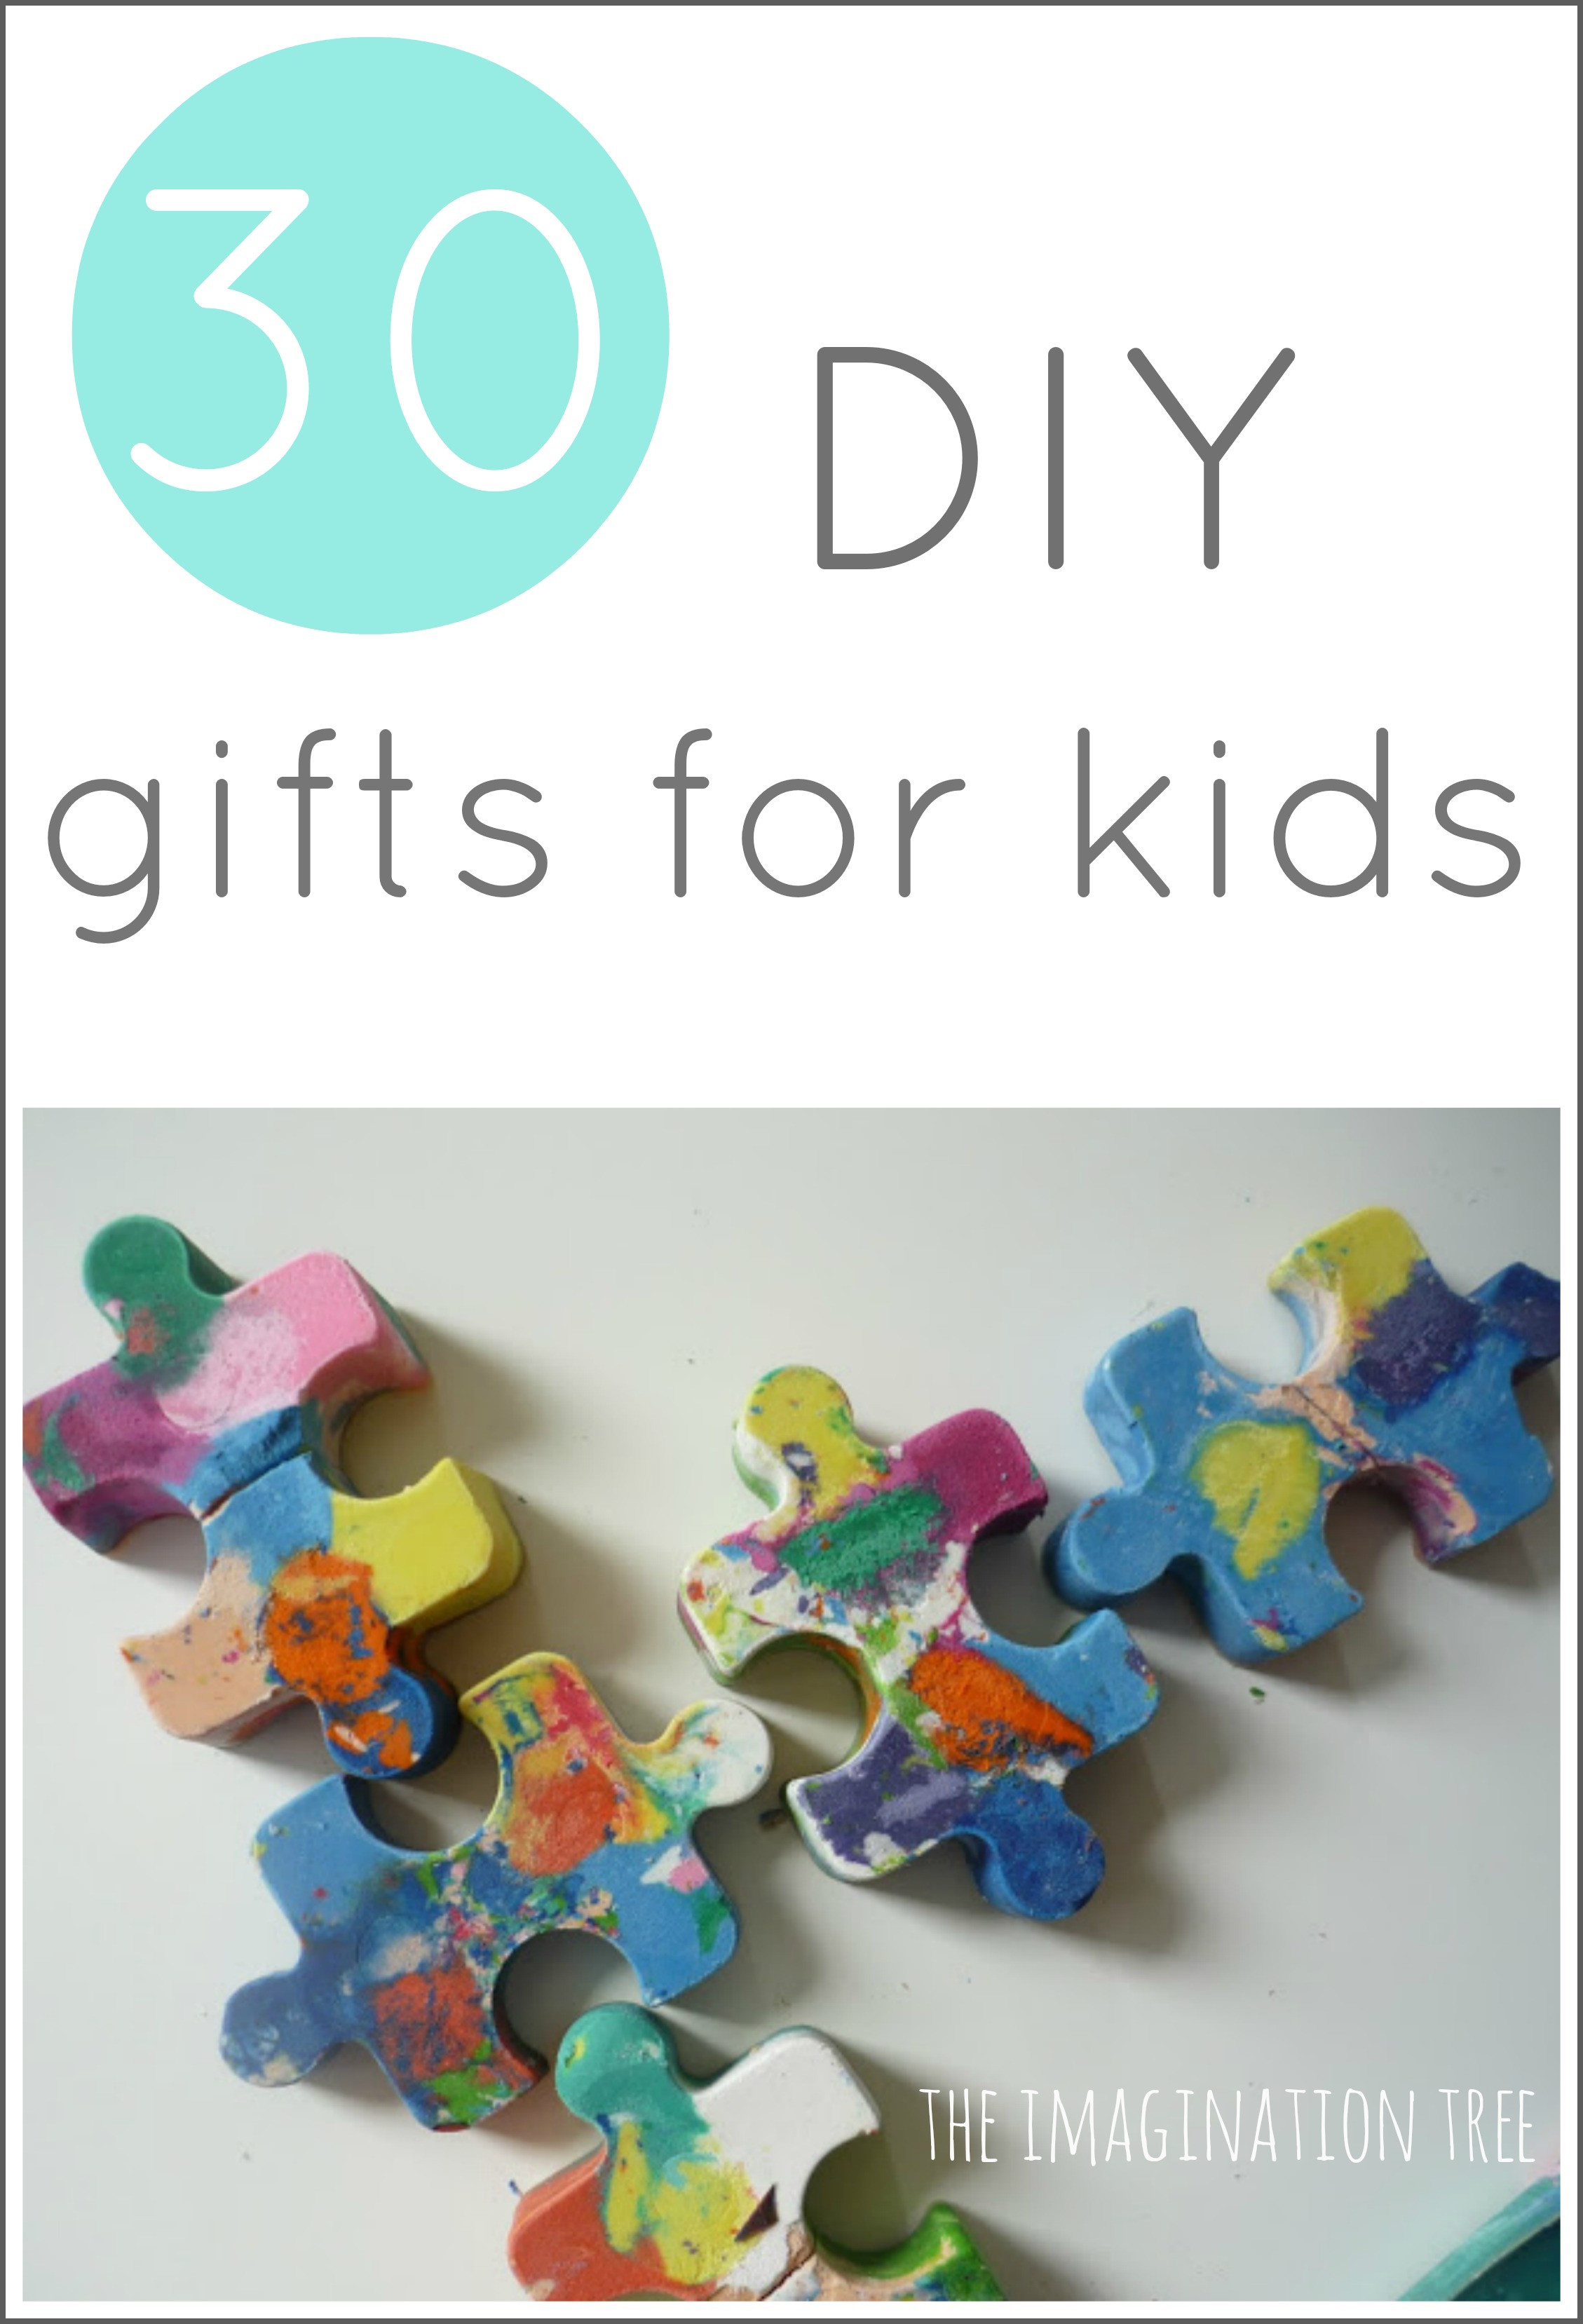 DIY Kid Christmas Gifts
 30 DIY Gifts to Make for Kids The Imagination Tree